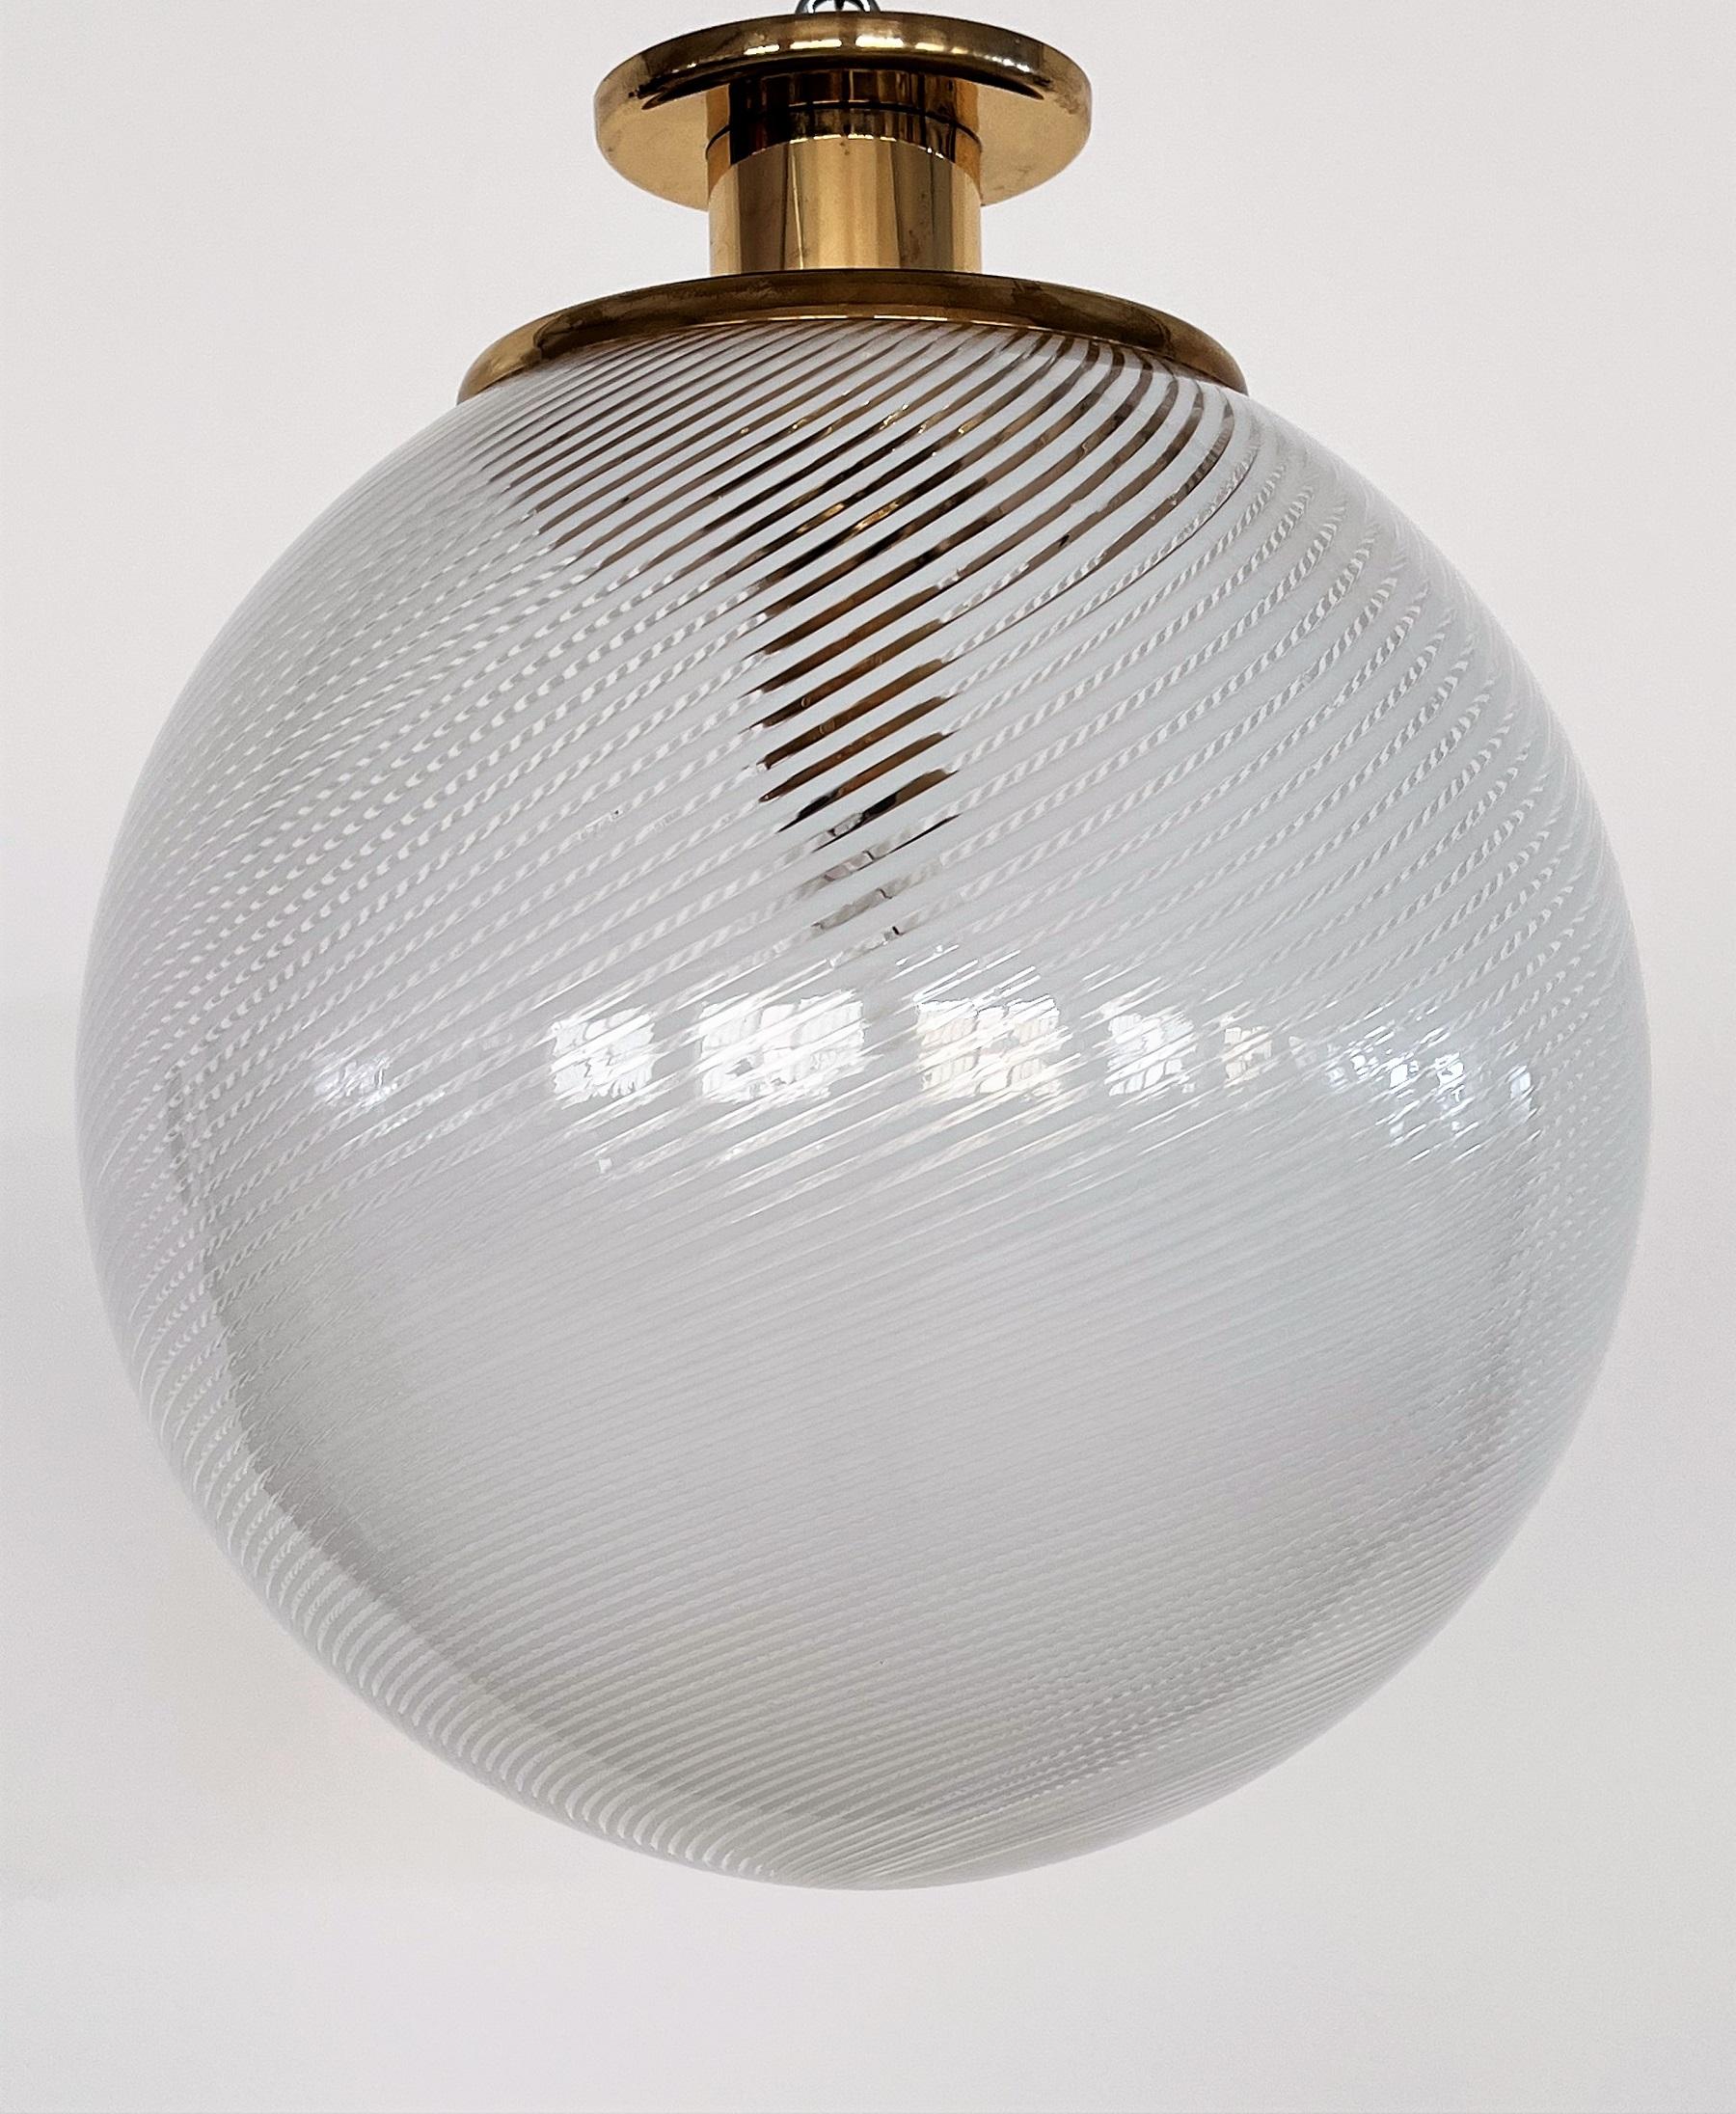 Gorgeous flush mount light or pendant lamp with large murano glass globe and brass frame.
Made in Italy in the 1970s by Venini.
The beautiful glass globe presents shiny white stripes on transparent glass ground. When illuminated, leaves gorgeous